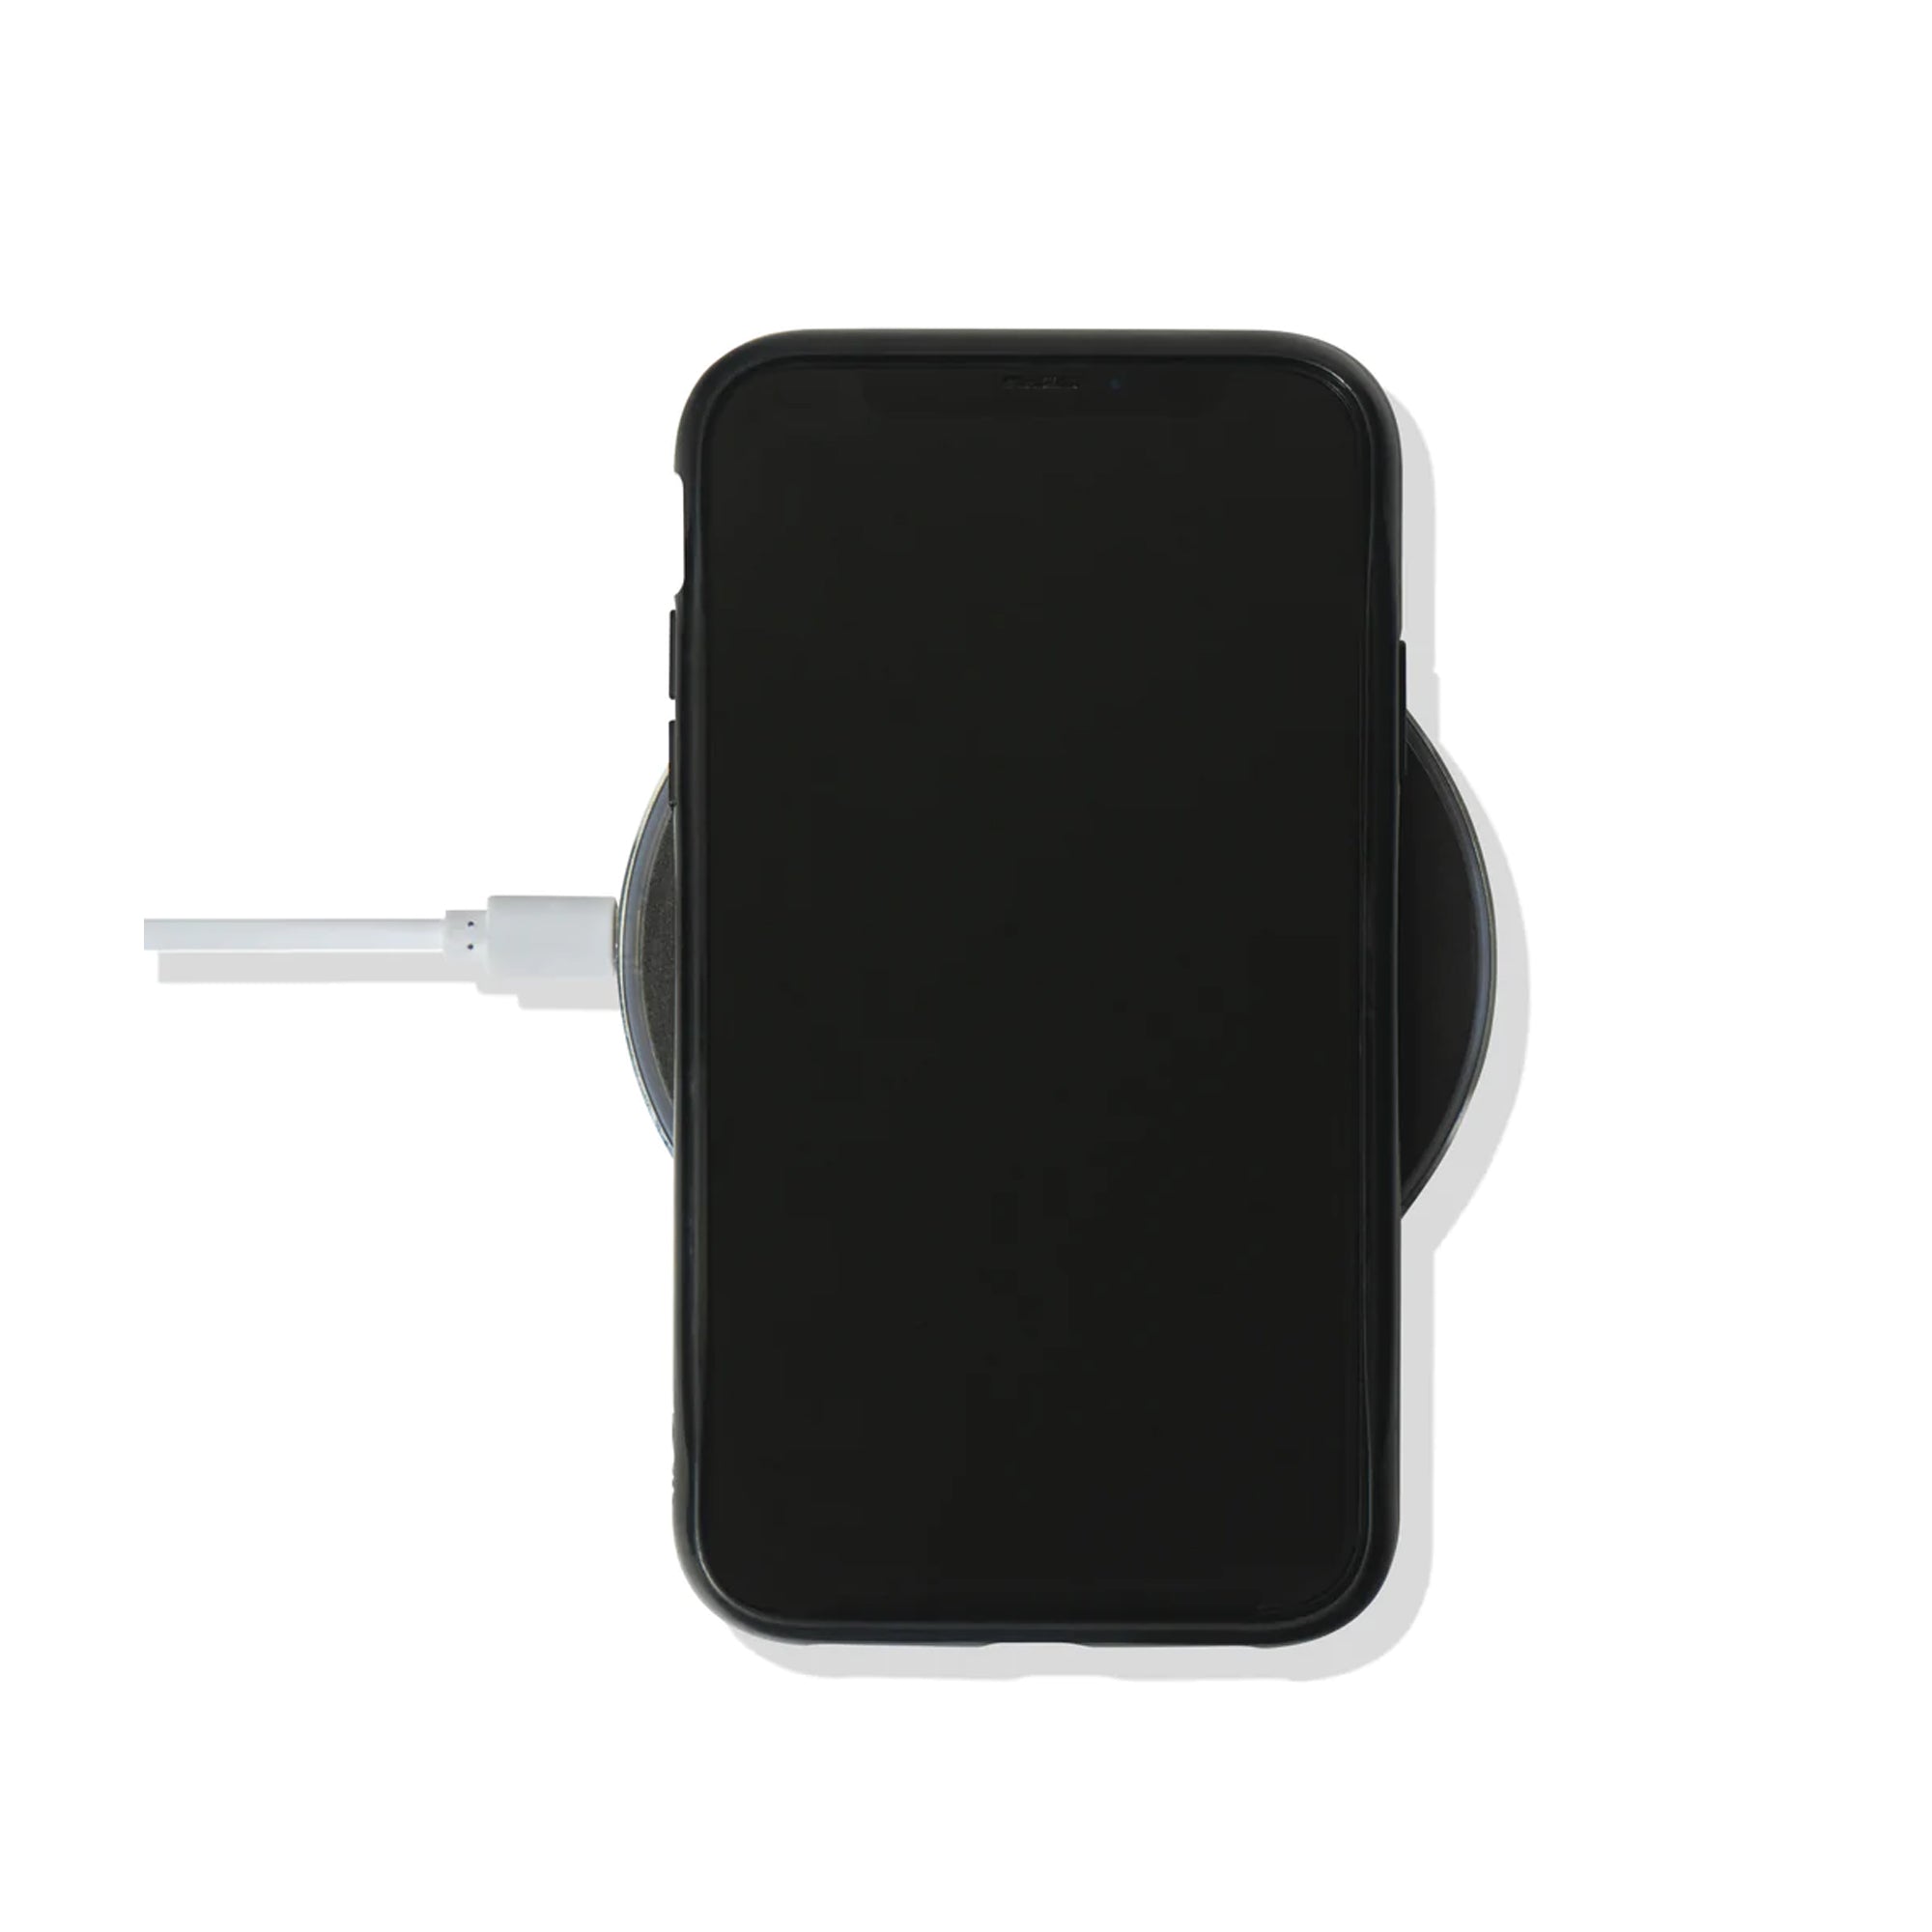 Anti Social Social Club Intimacy Wireless Charger